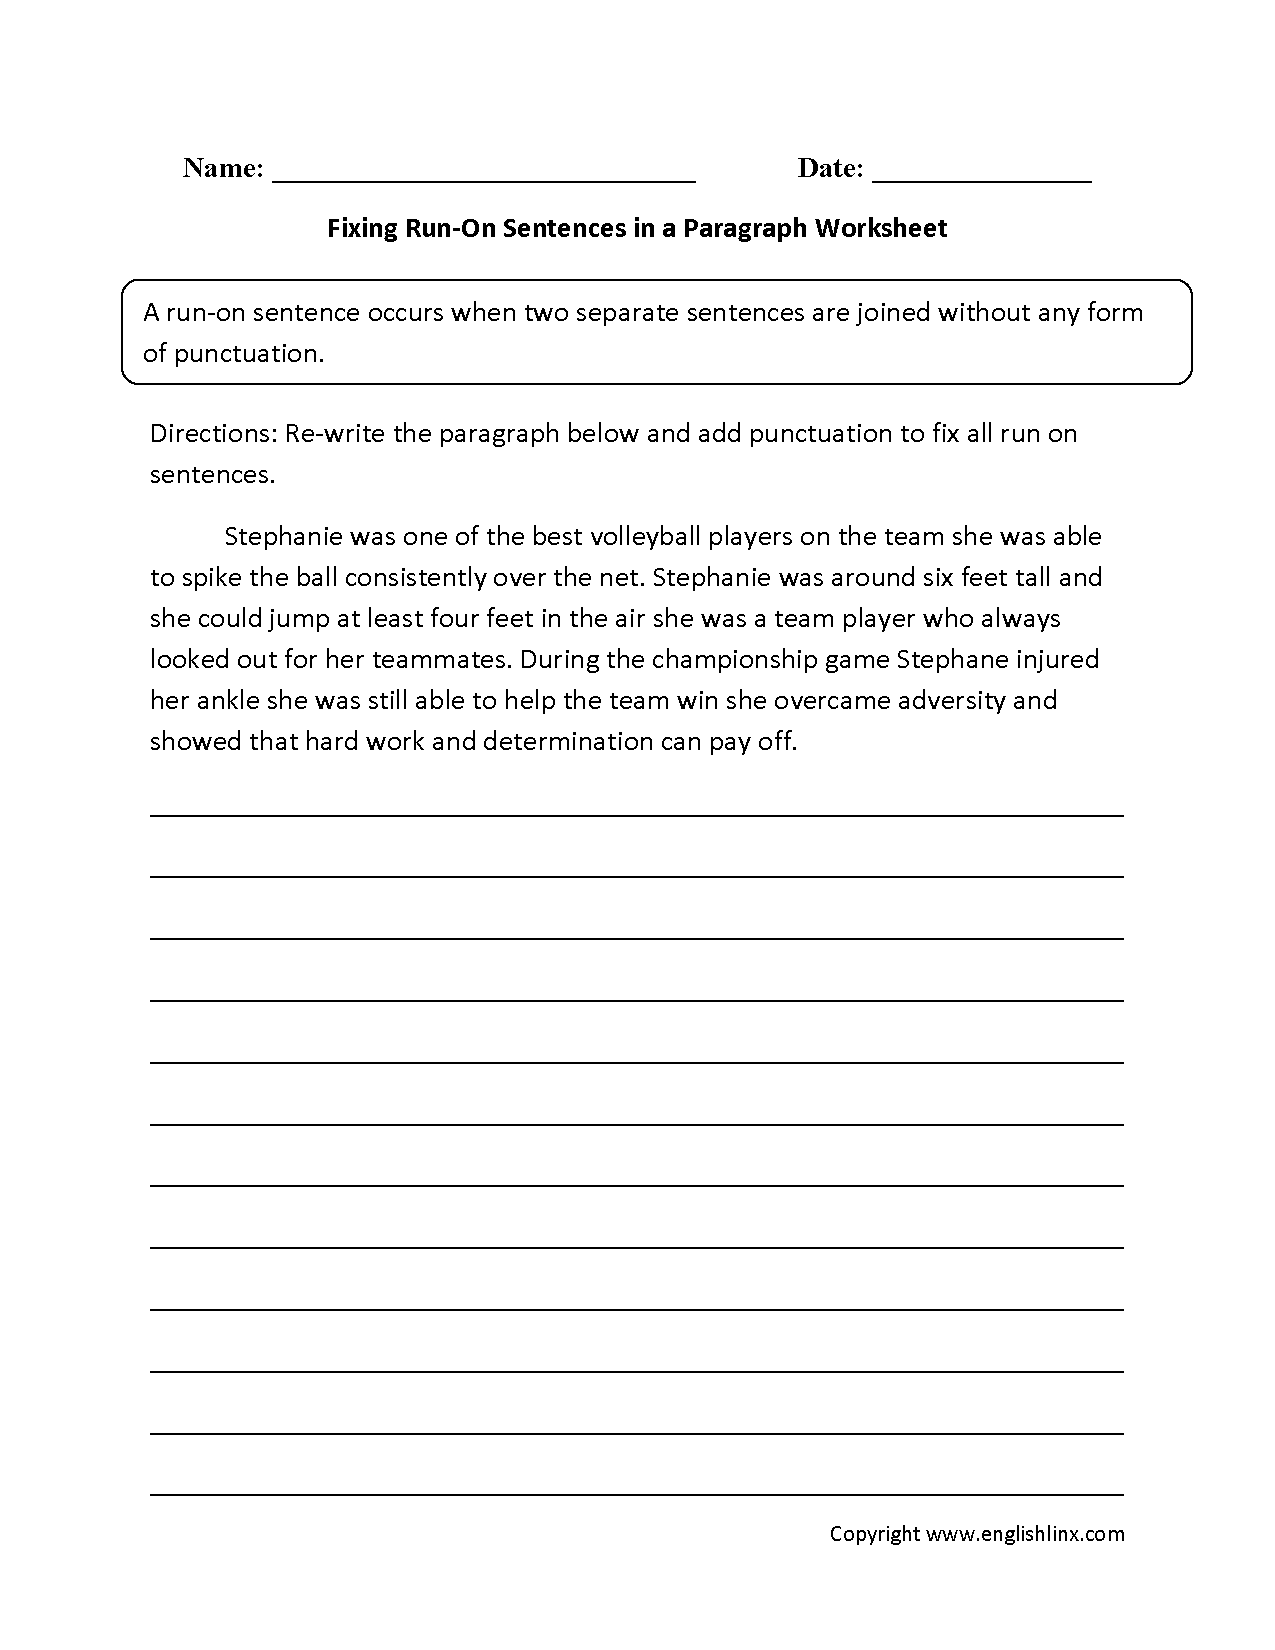 Fixing Paragraphs with Run on Sentences Worksheets